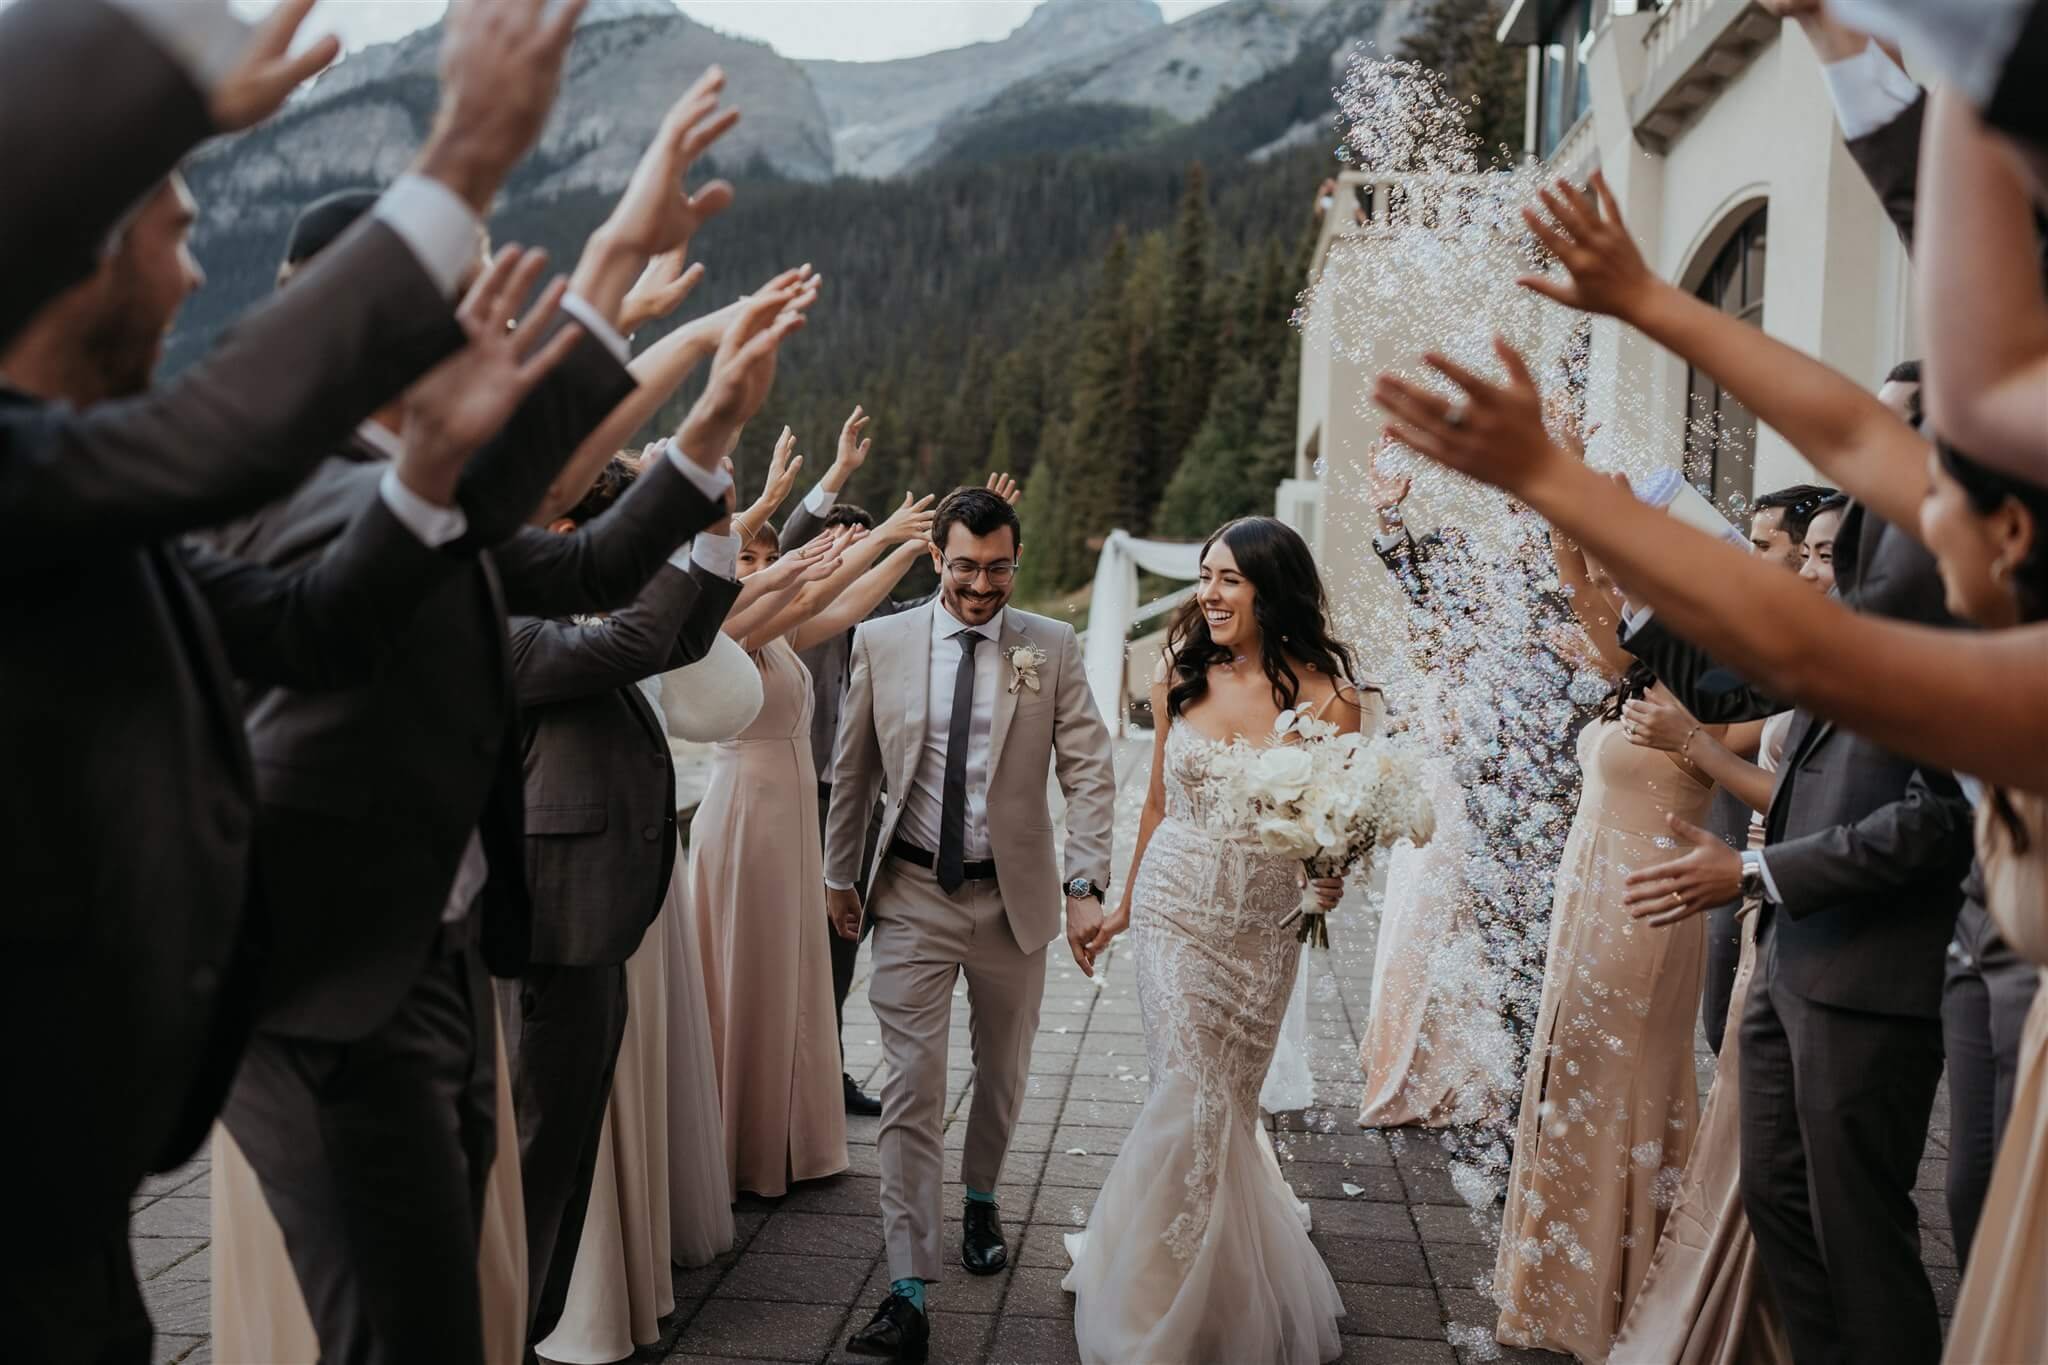 Bride and groom run through wedding party tunnel at Lake Louise wedding